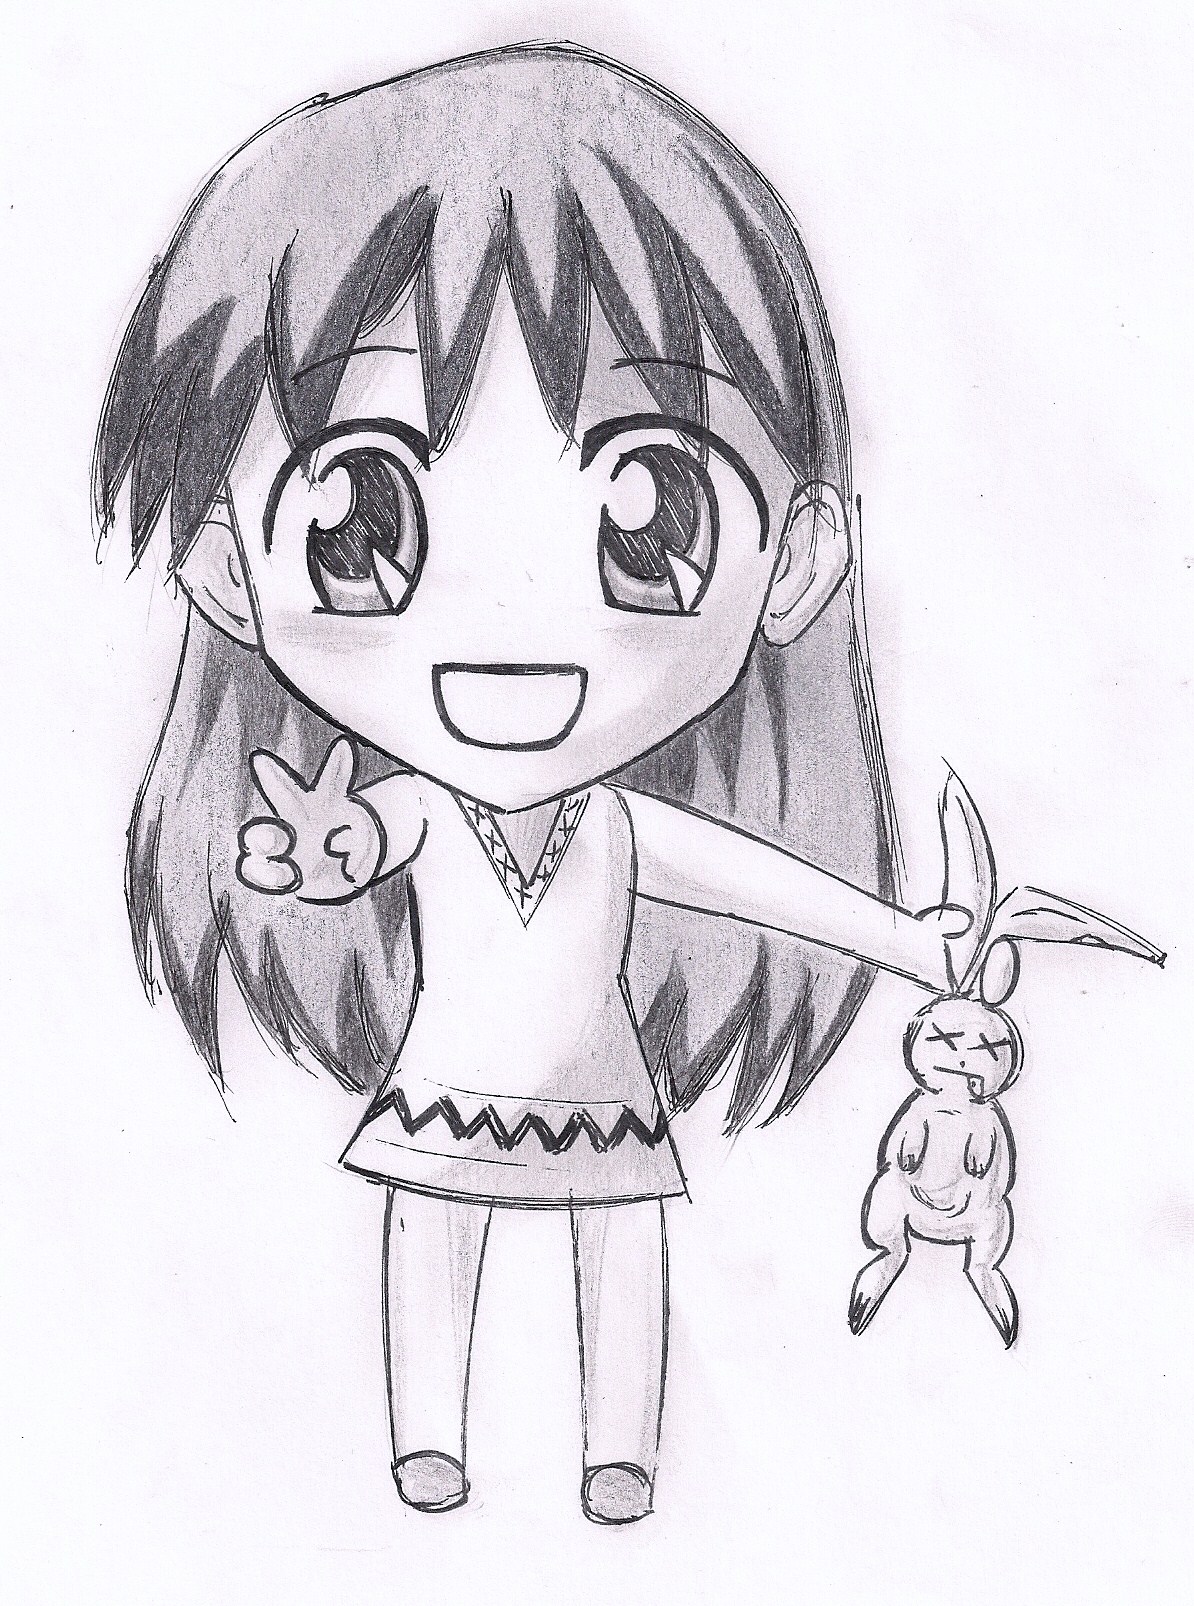 chibi girl by YoukoHikari26 on Clipart library